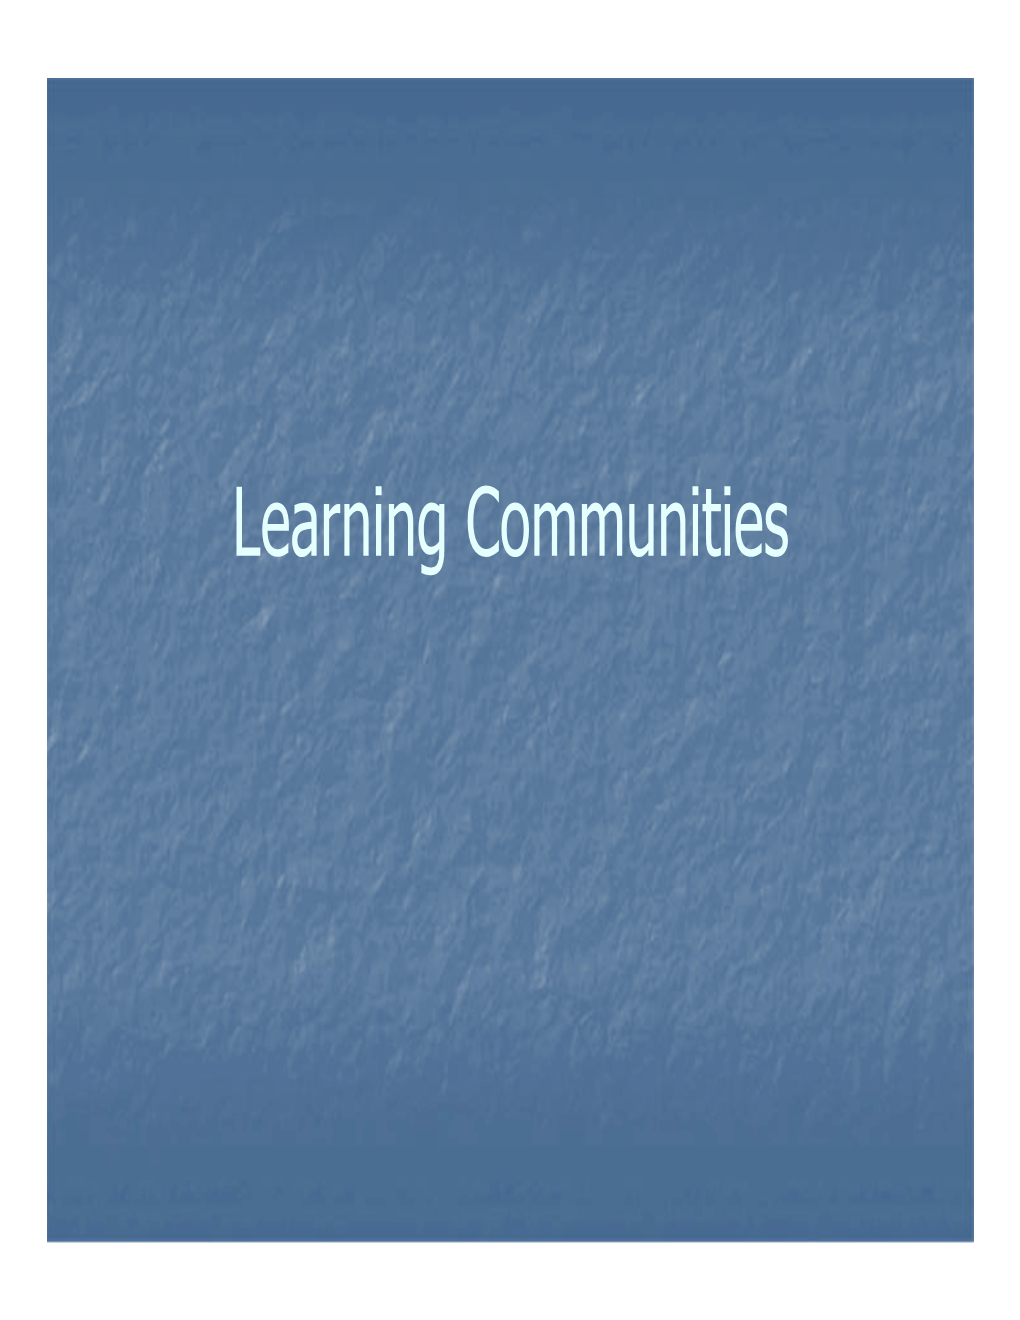 Learning Communities What Is a Learning Community?